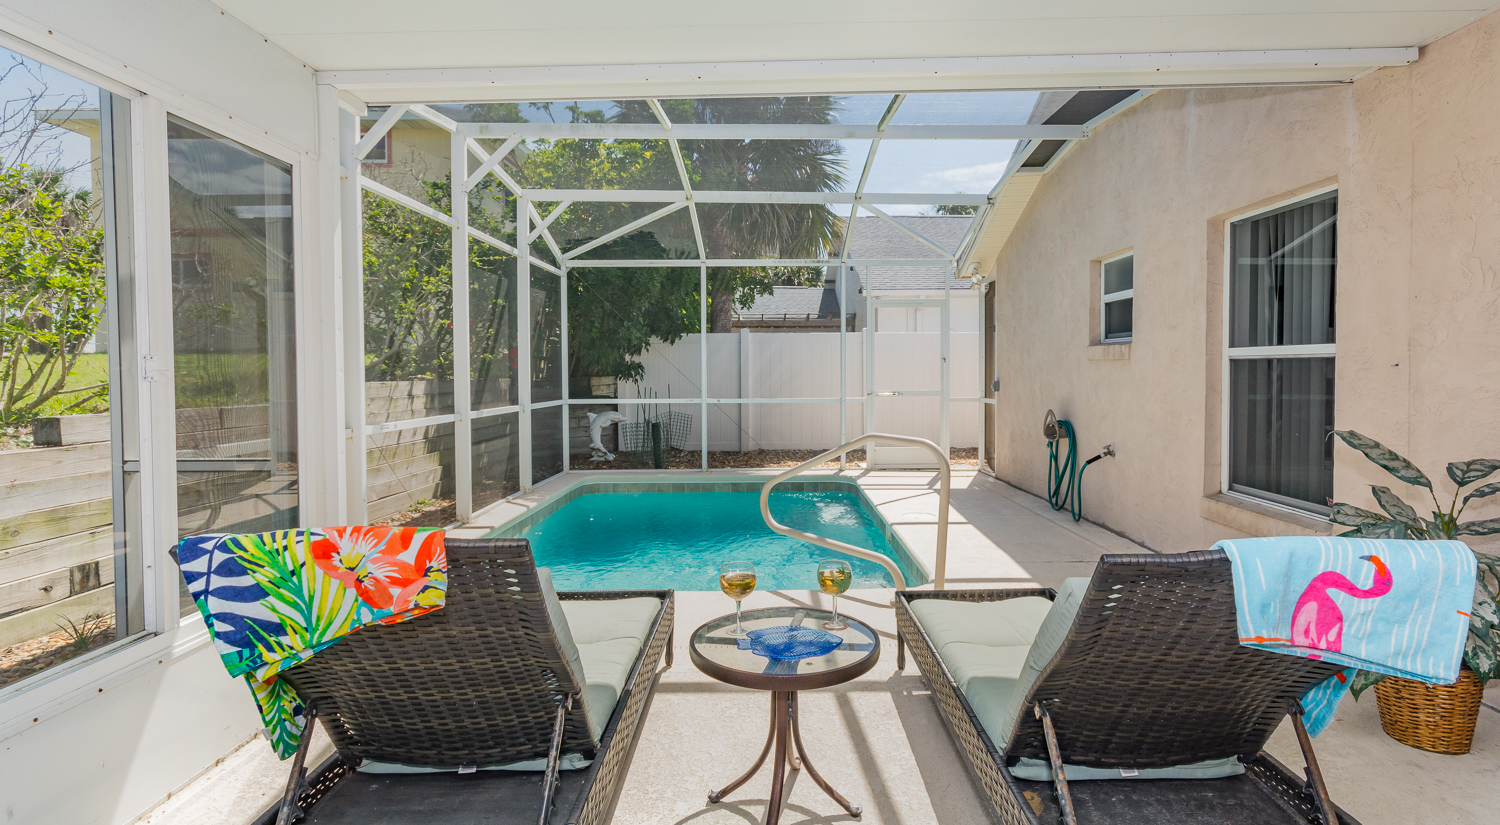 Sit back and relax or entertain poolside.